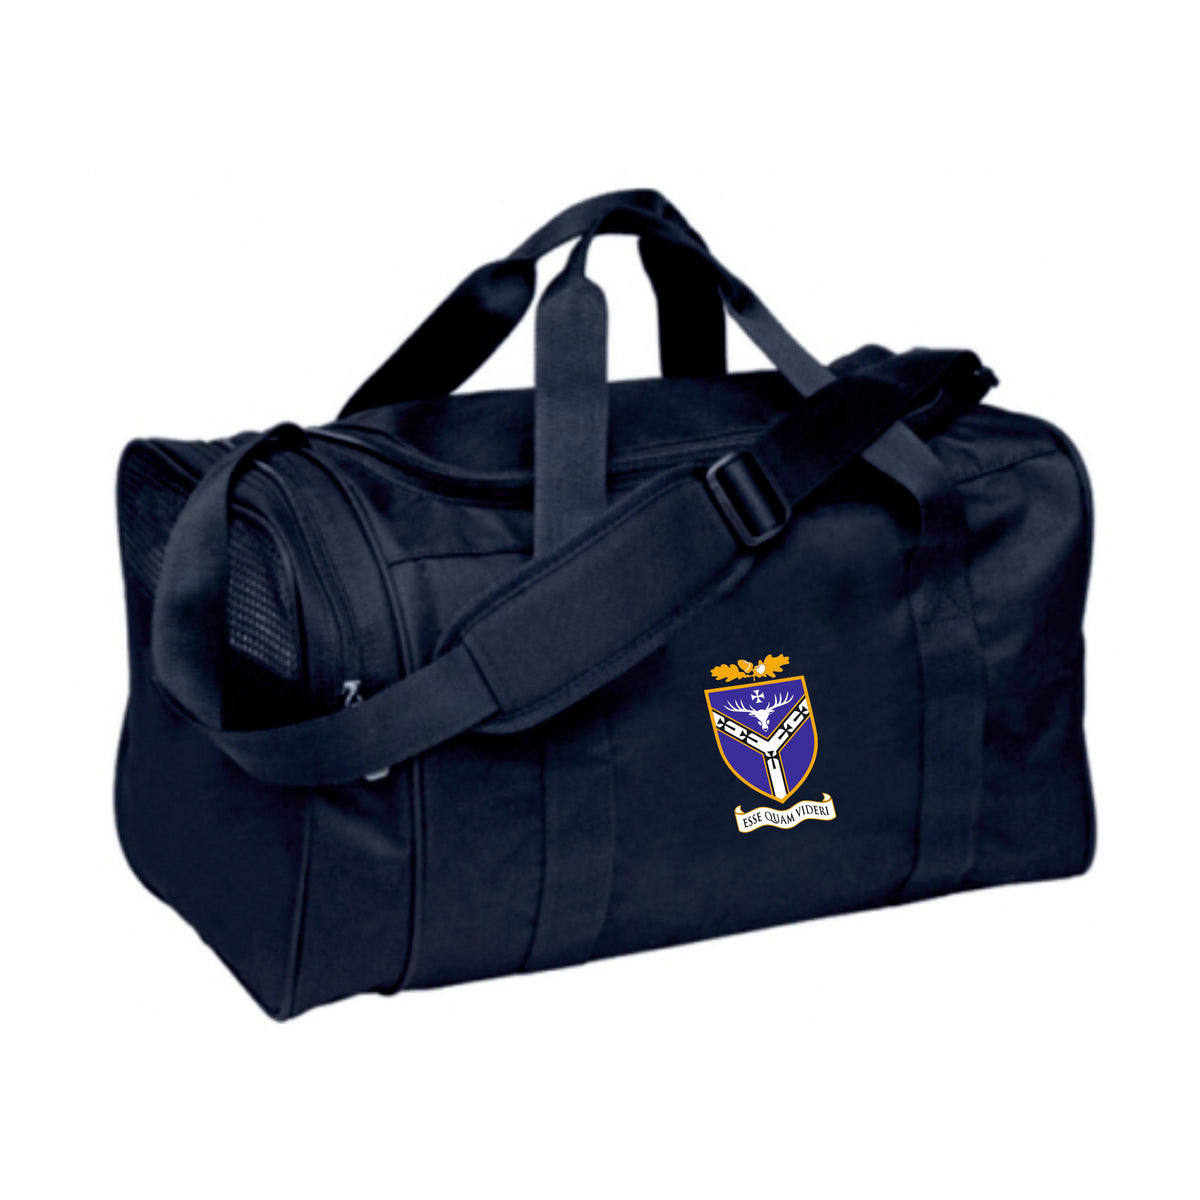 Forest School Sports Holdall